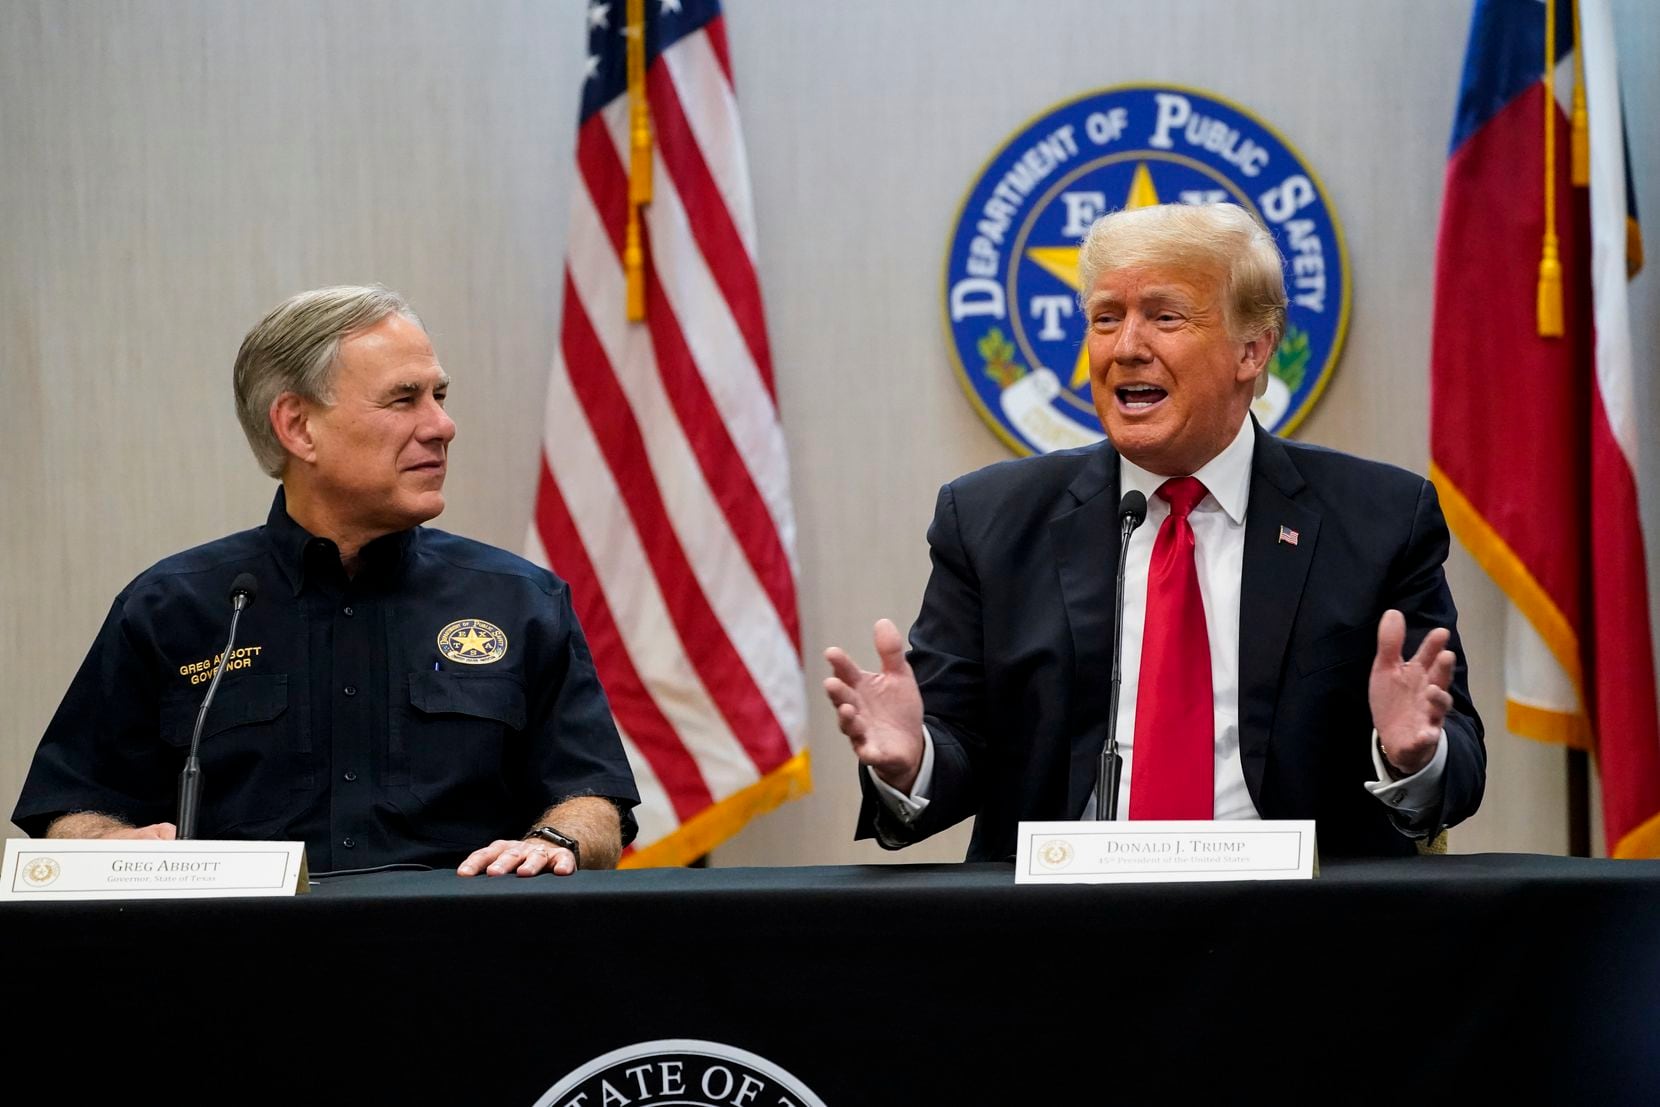 Texas Gov. Greg Abbott and former President Donald Trump attended a briefing on border...